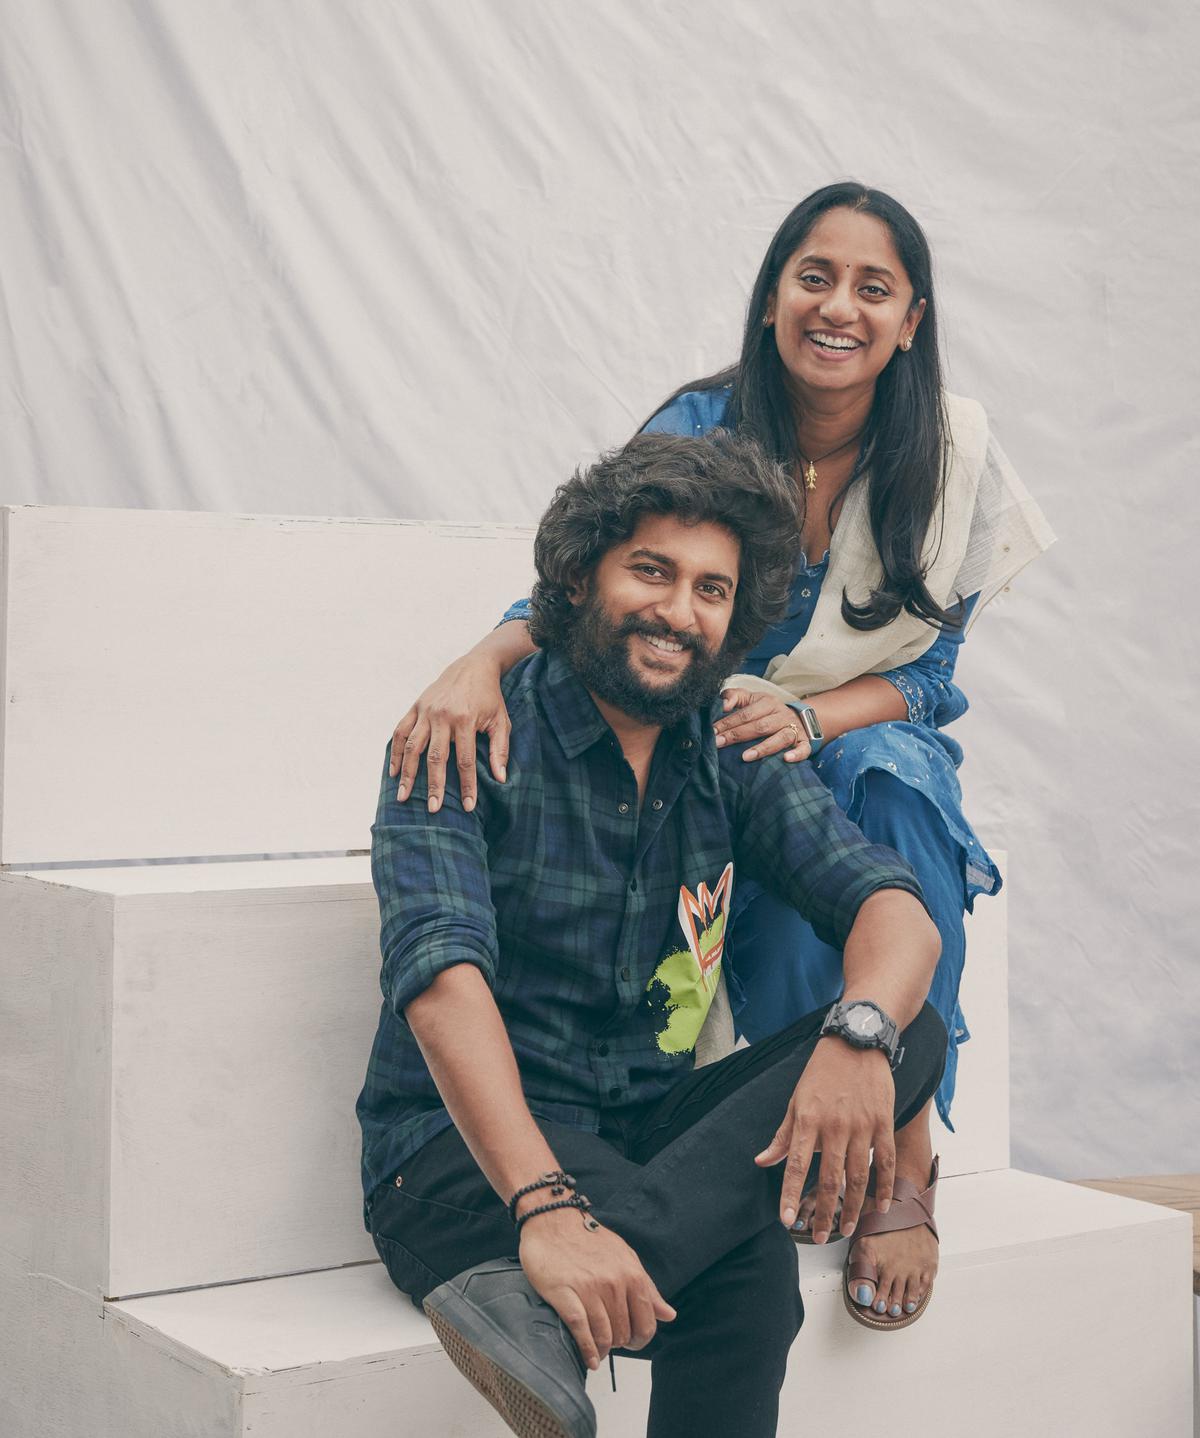 Telugu anthology ‘Meet Cute’: Siblings actor-producer Nani and director Deepthi discuss their journey, from fighting over TV remote to collaborating for a project